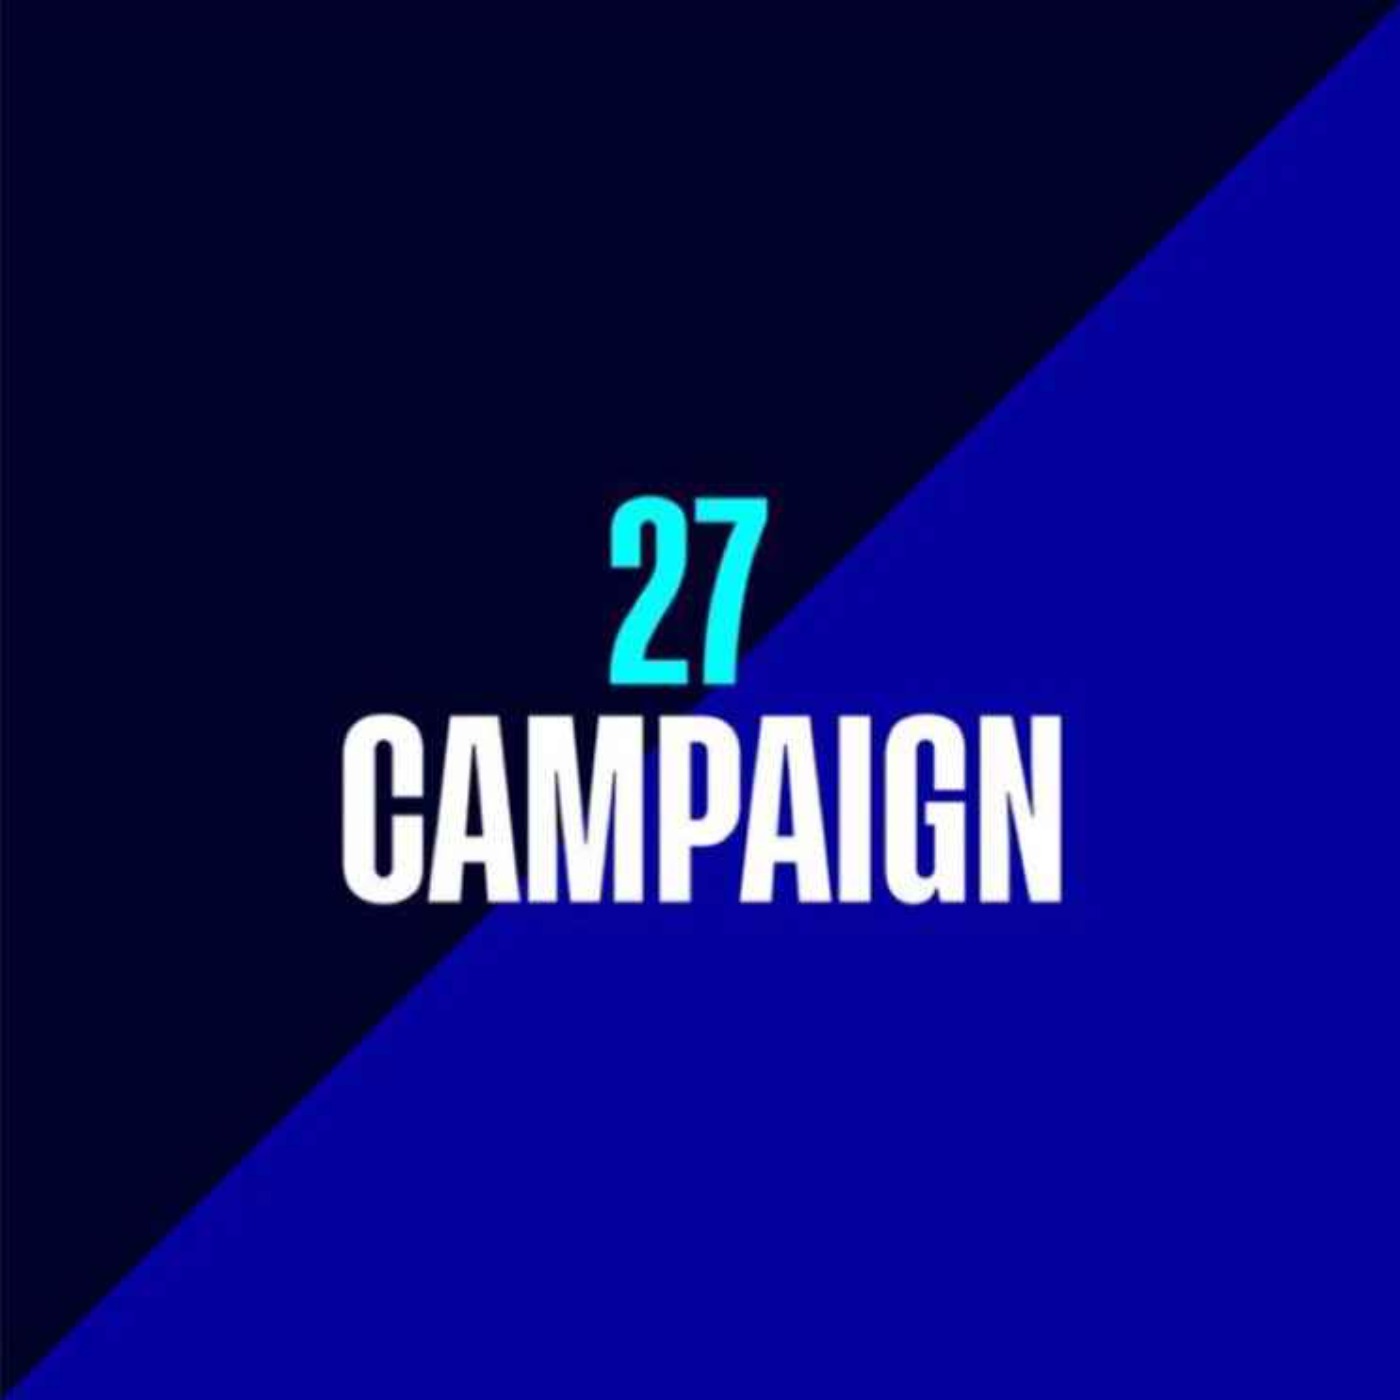 The 27years campaign Twitter Space, broadcast on Thursday 20 January 2022